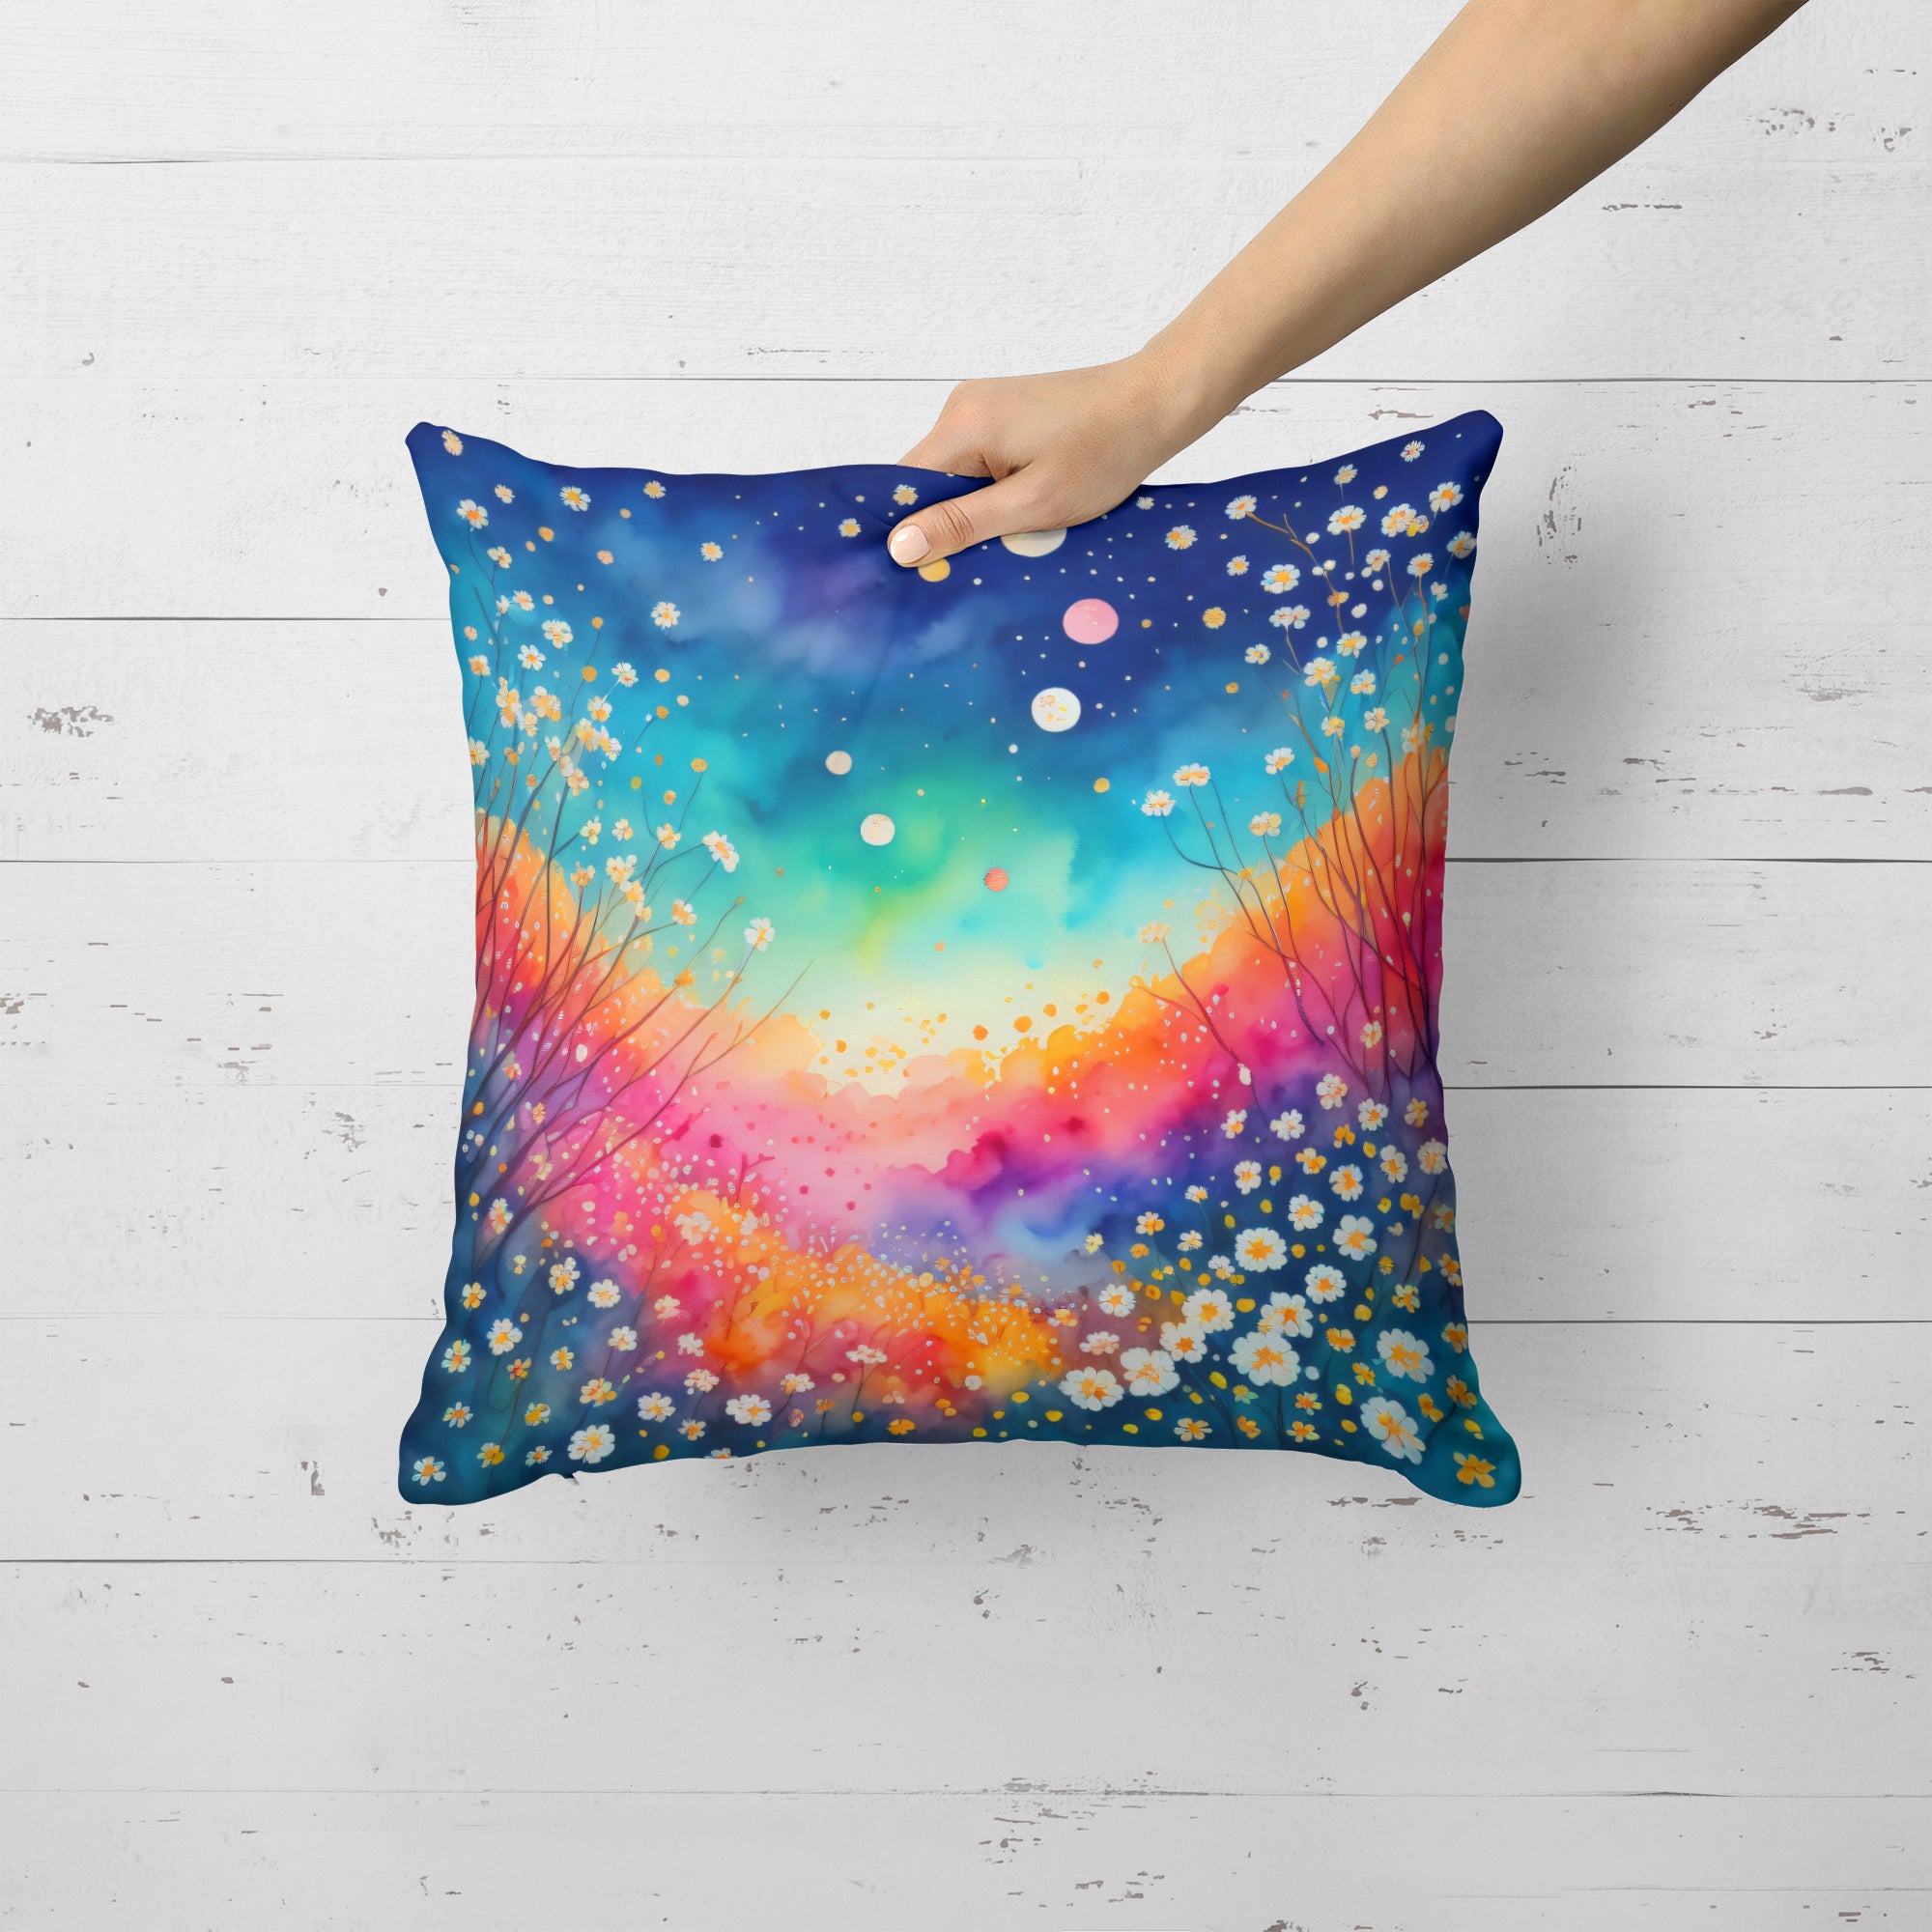 Buy this Colorful Gypsophila Fabric Decorative Pillow